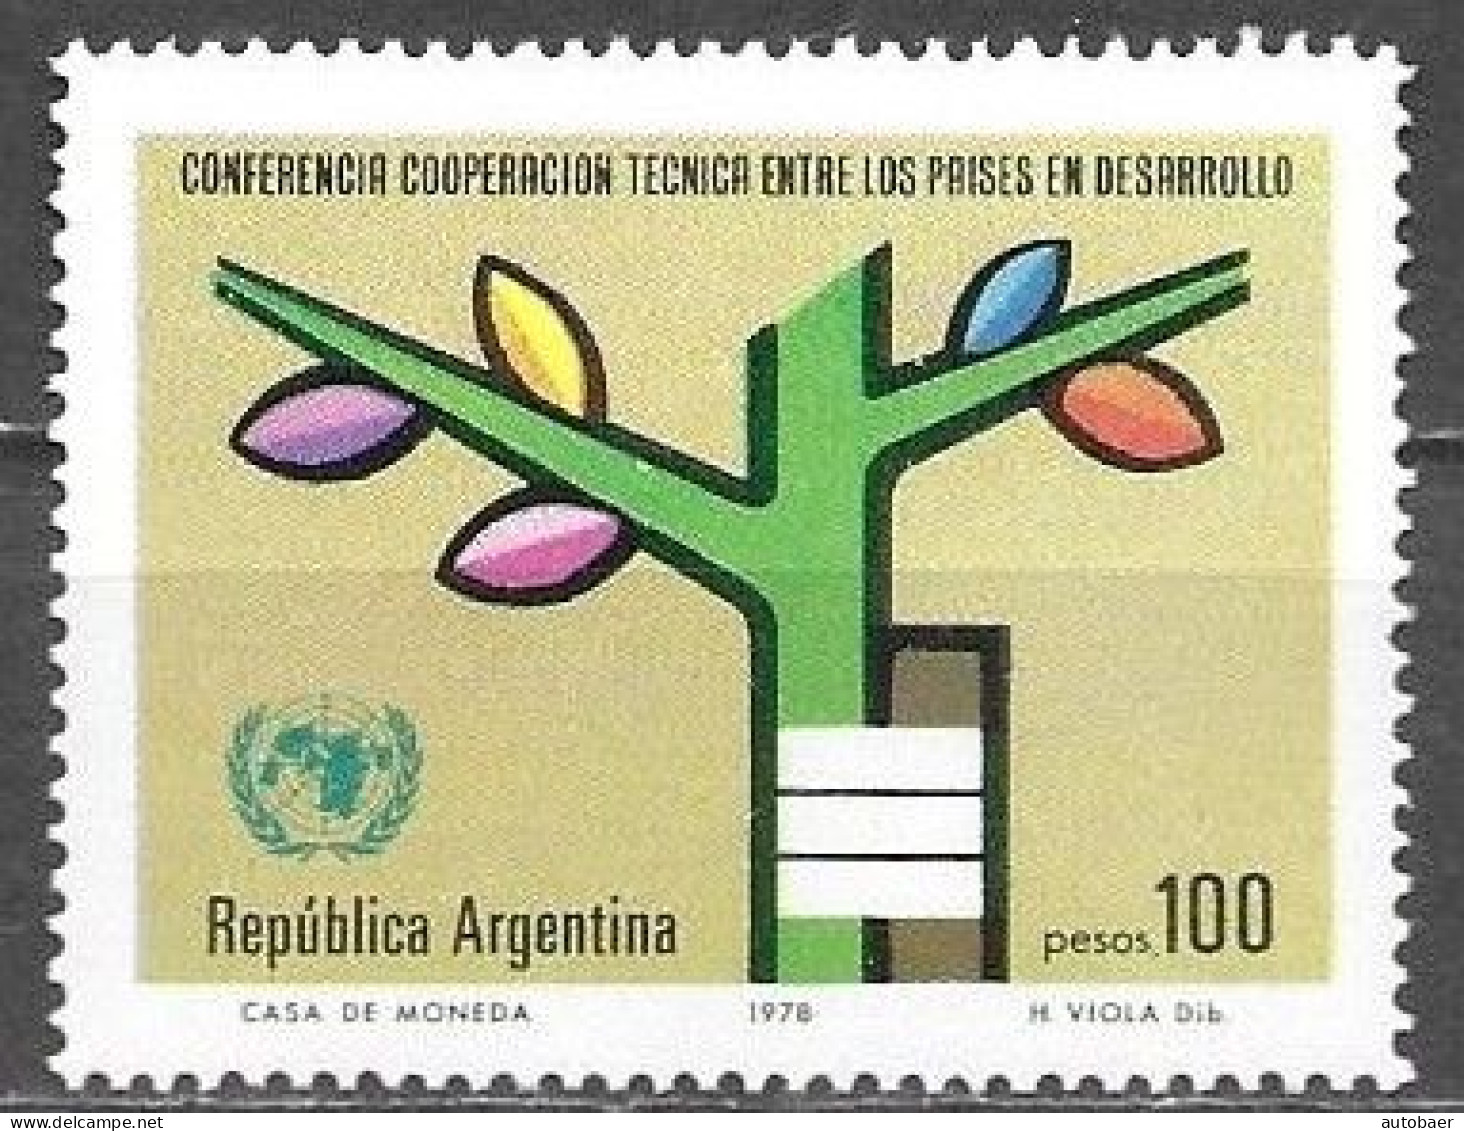 Argentina 1978 Conferencia Cooperacion Conference Cooperation Developing Countries Mi. 1353 MNH Postfrisch Neuf ** - Ongebruikt